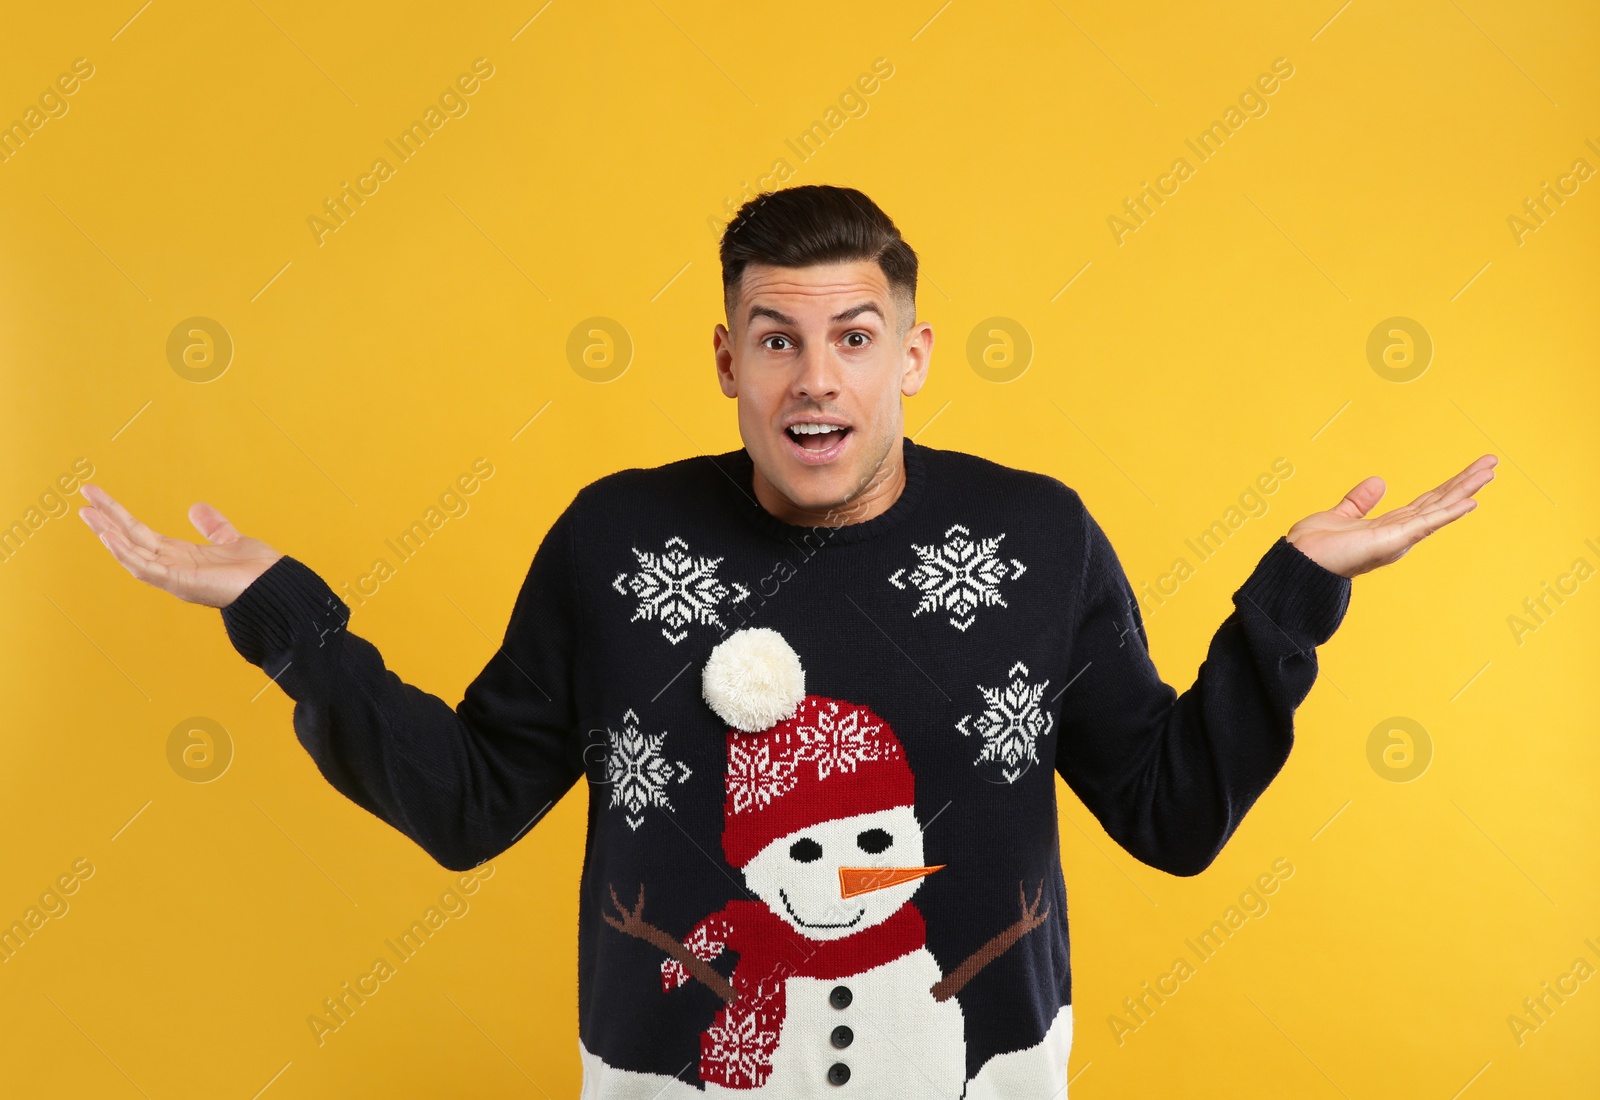 Photo of Surprised man in Christmas sweater on yellow background